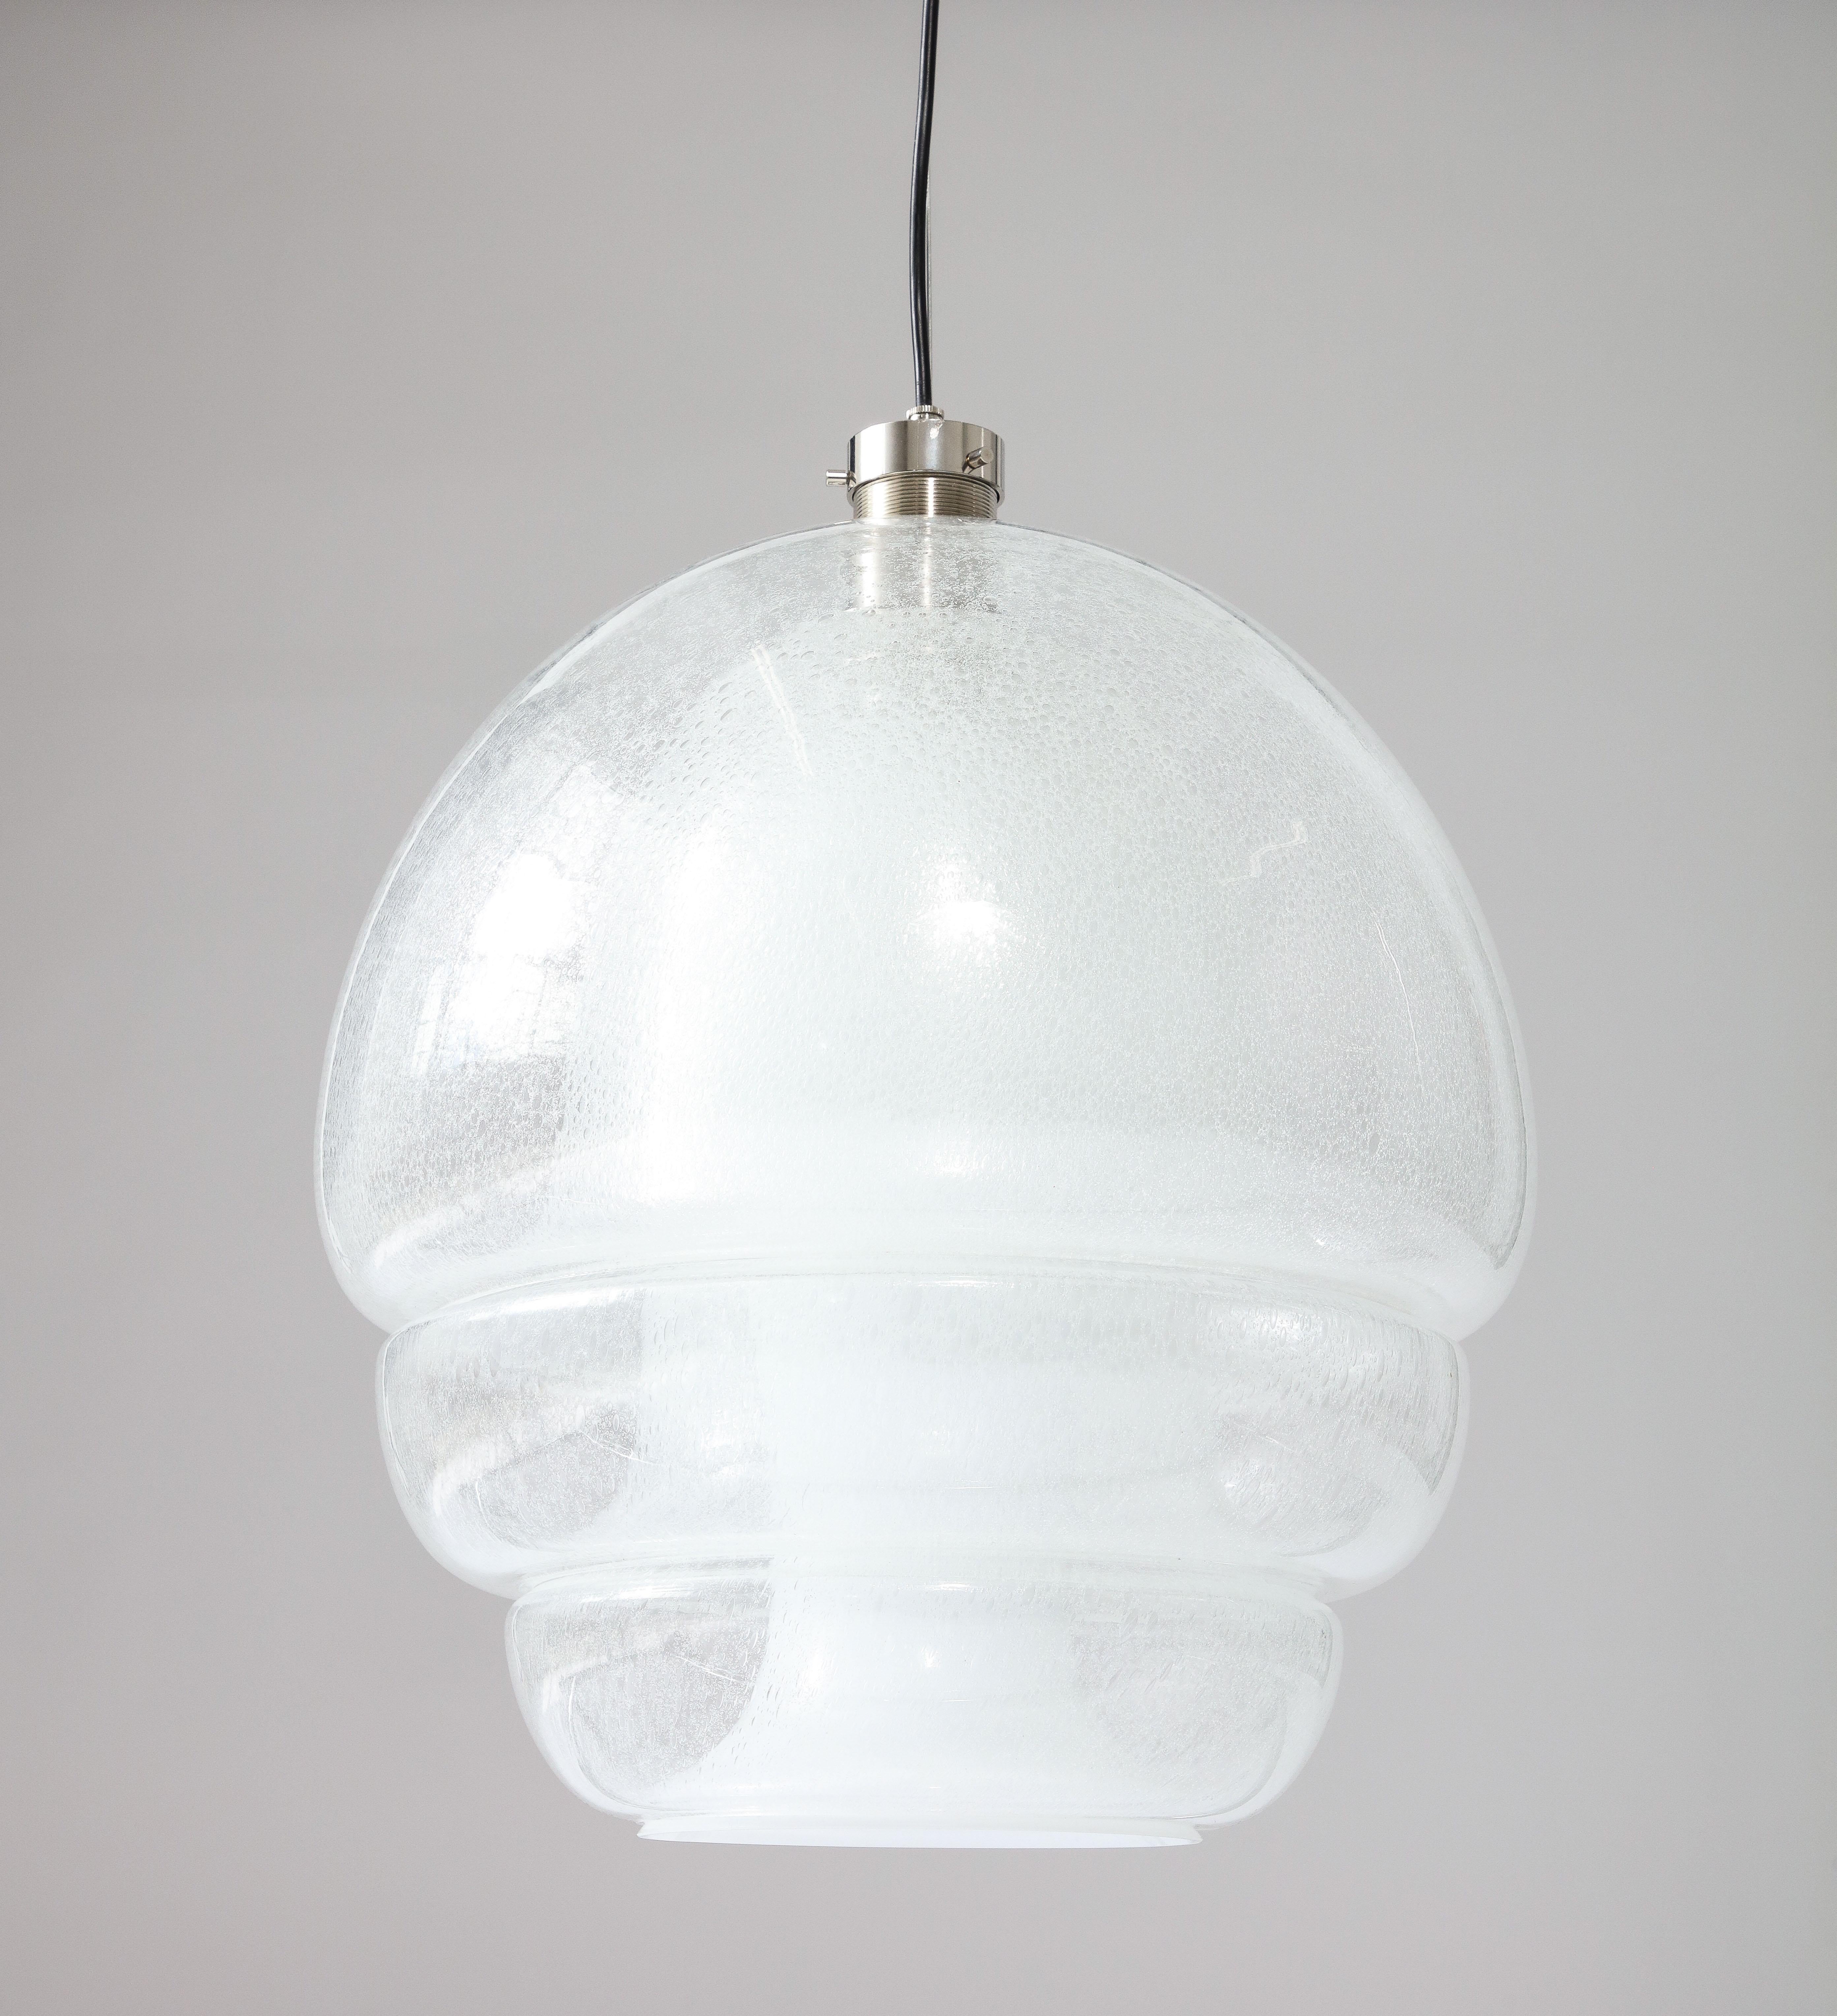 LS 134 Medusa Ceiling Lamp/Pendant by Carlo Nason, Italy, c. 1960 In Excellent Condition For Sale In New York City, NY